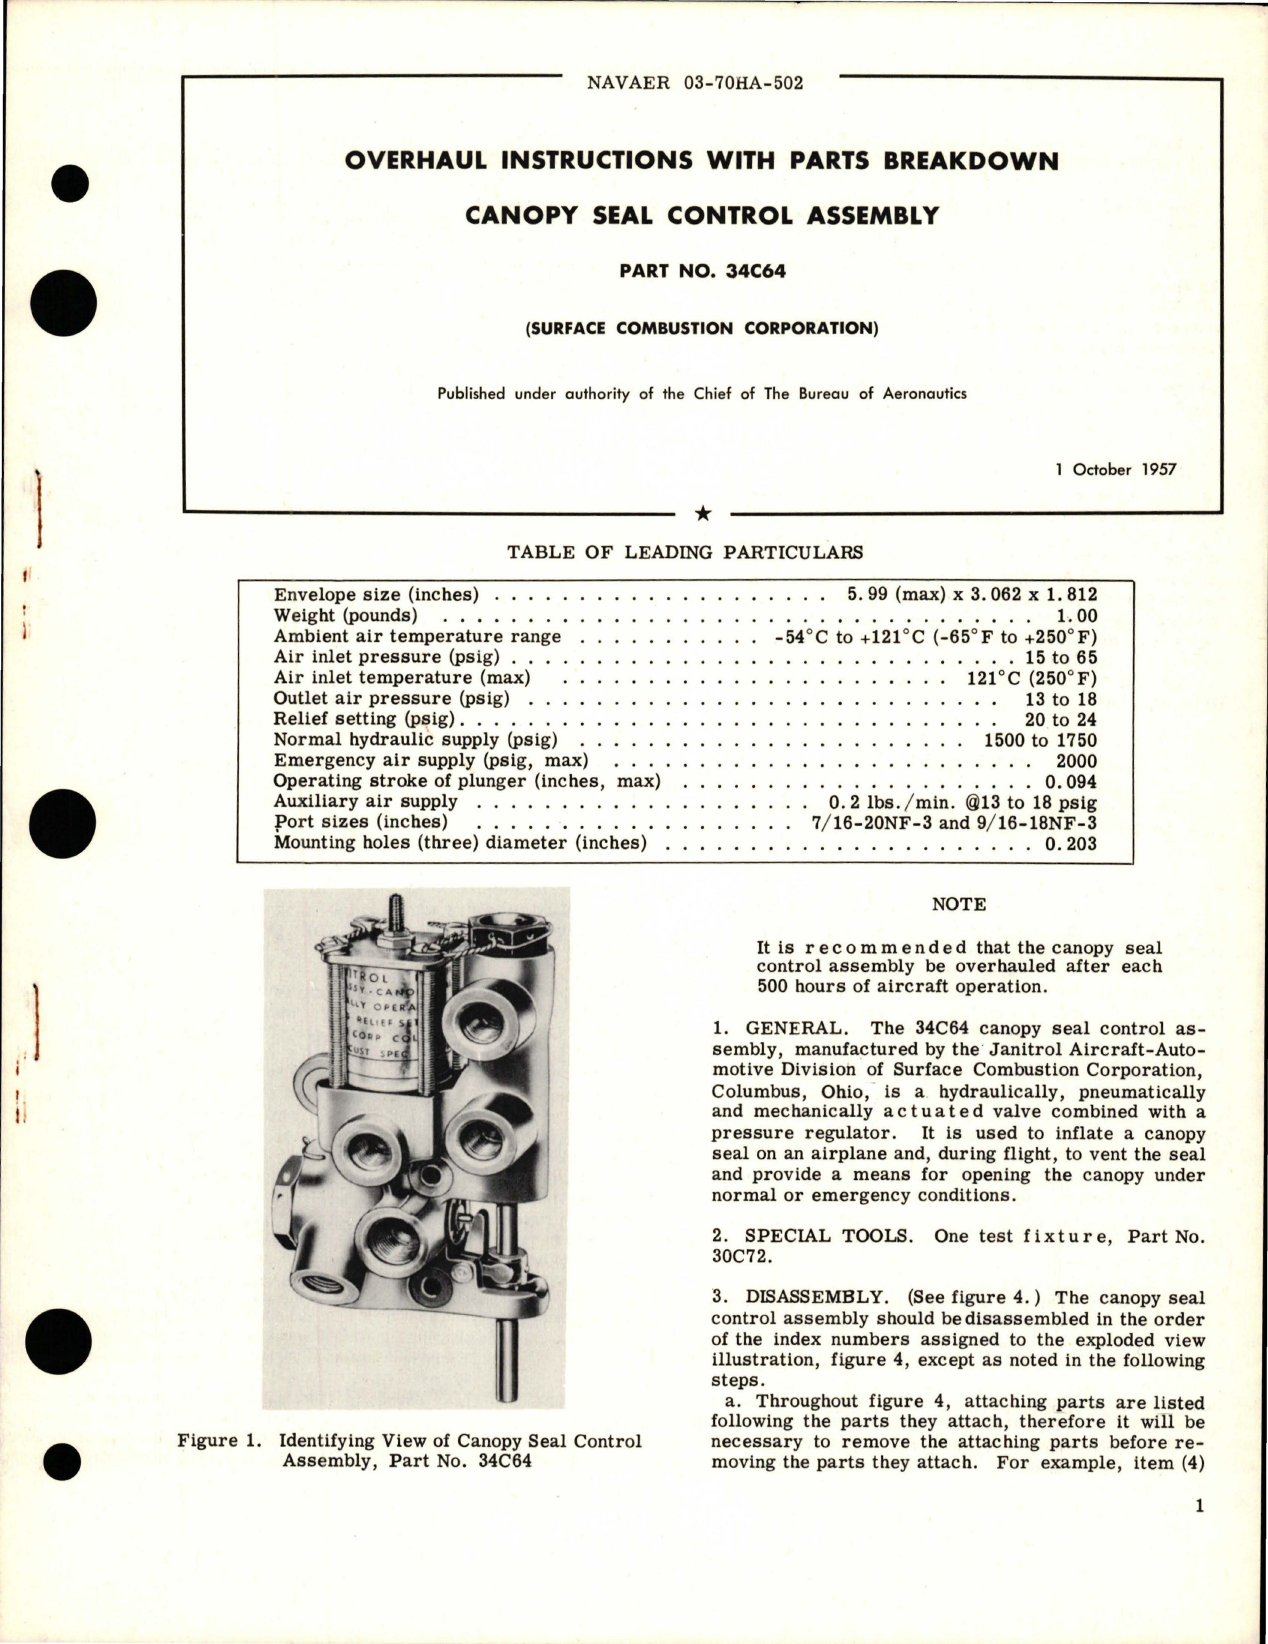 Sample page 1 from AirCorps Library document: Overhaul Instructions with Parts Breakdown for Canopy Seal Control Assembly - Part 34C64 